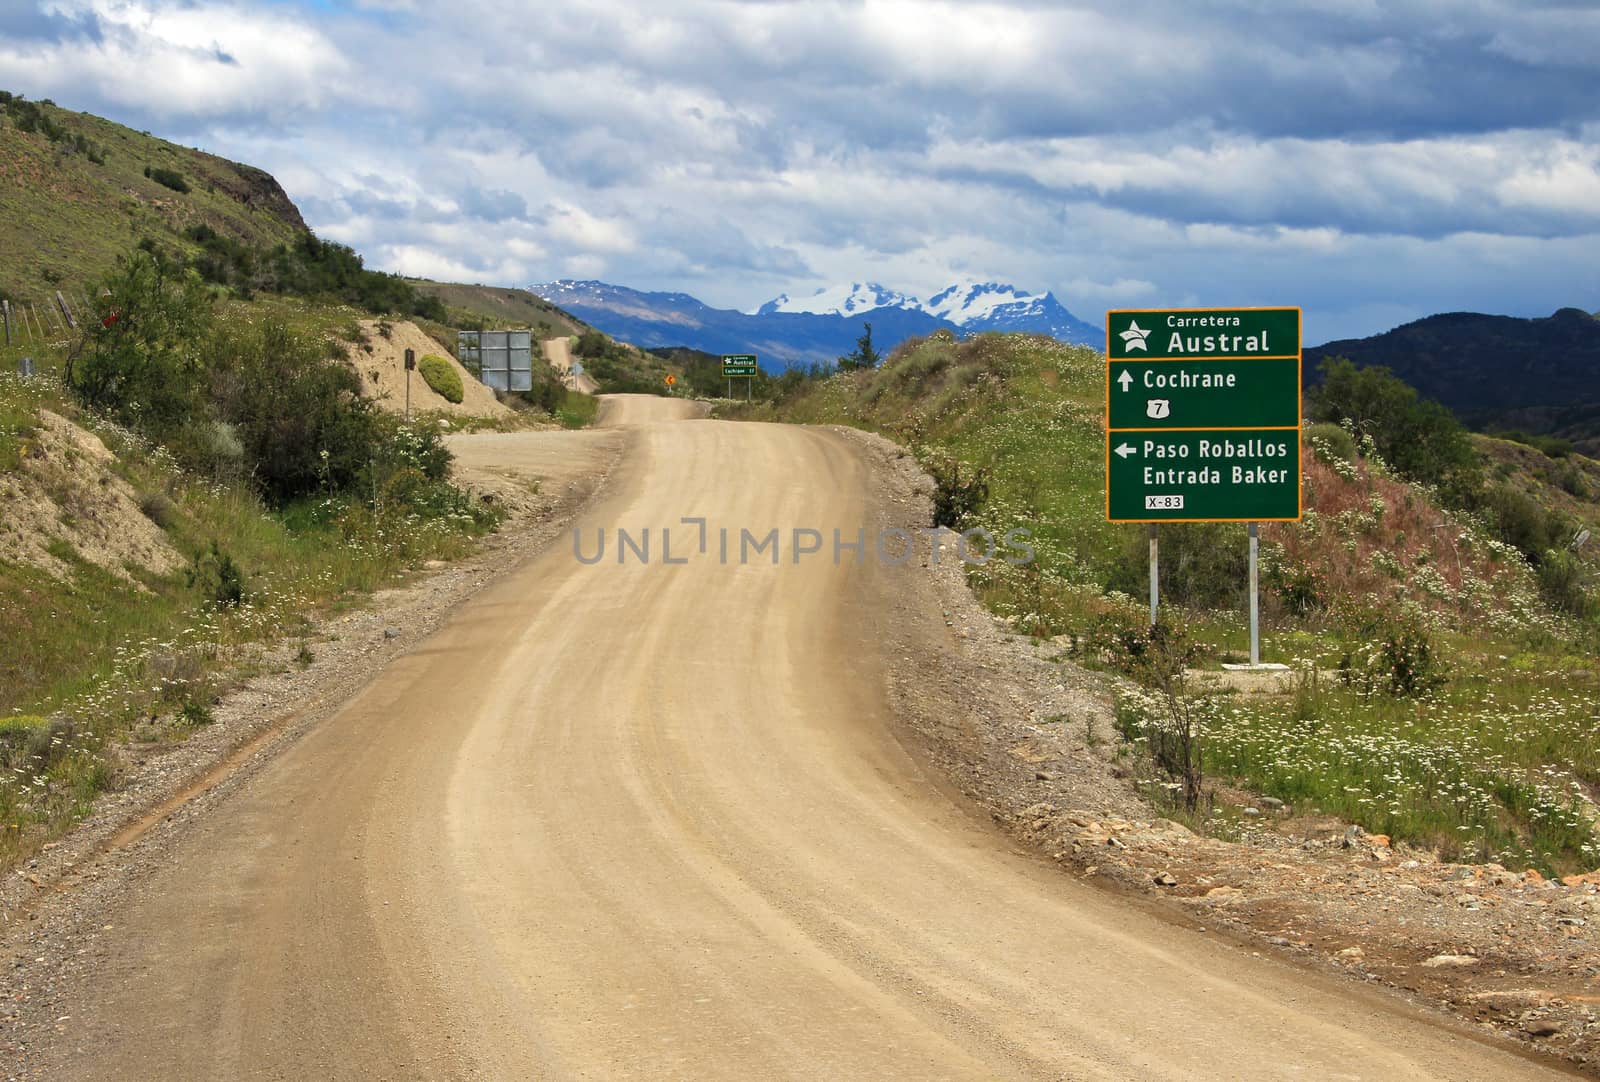 Carretera Austral highway, ruta 7, with road sign, Patagonia Chile